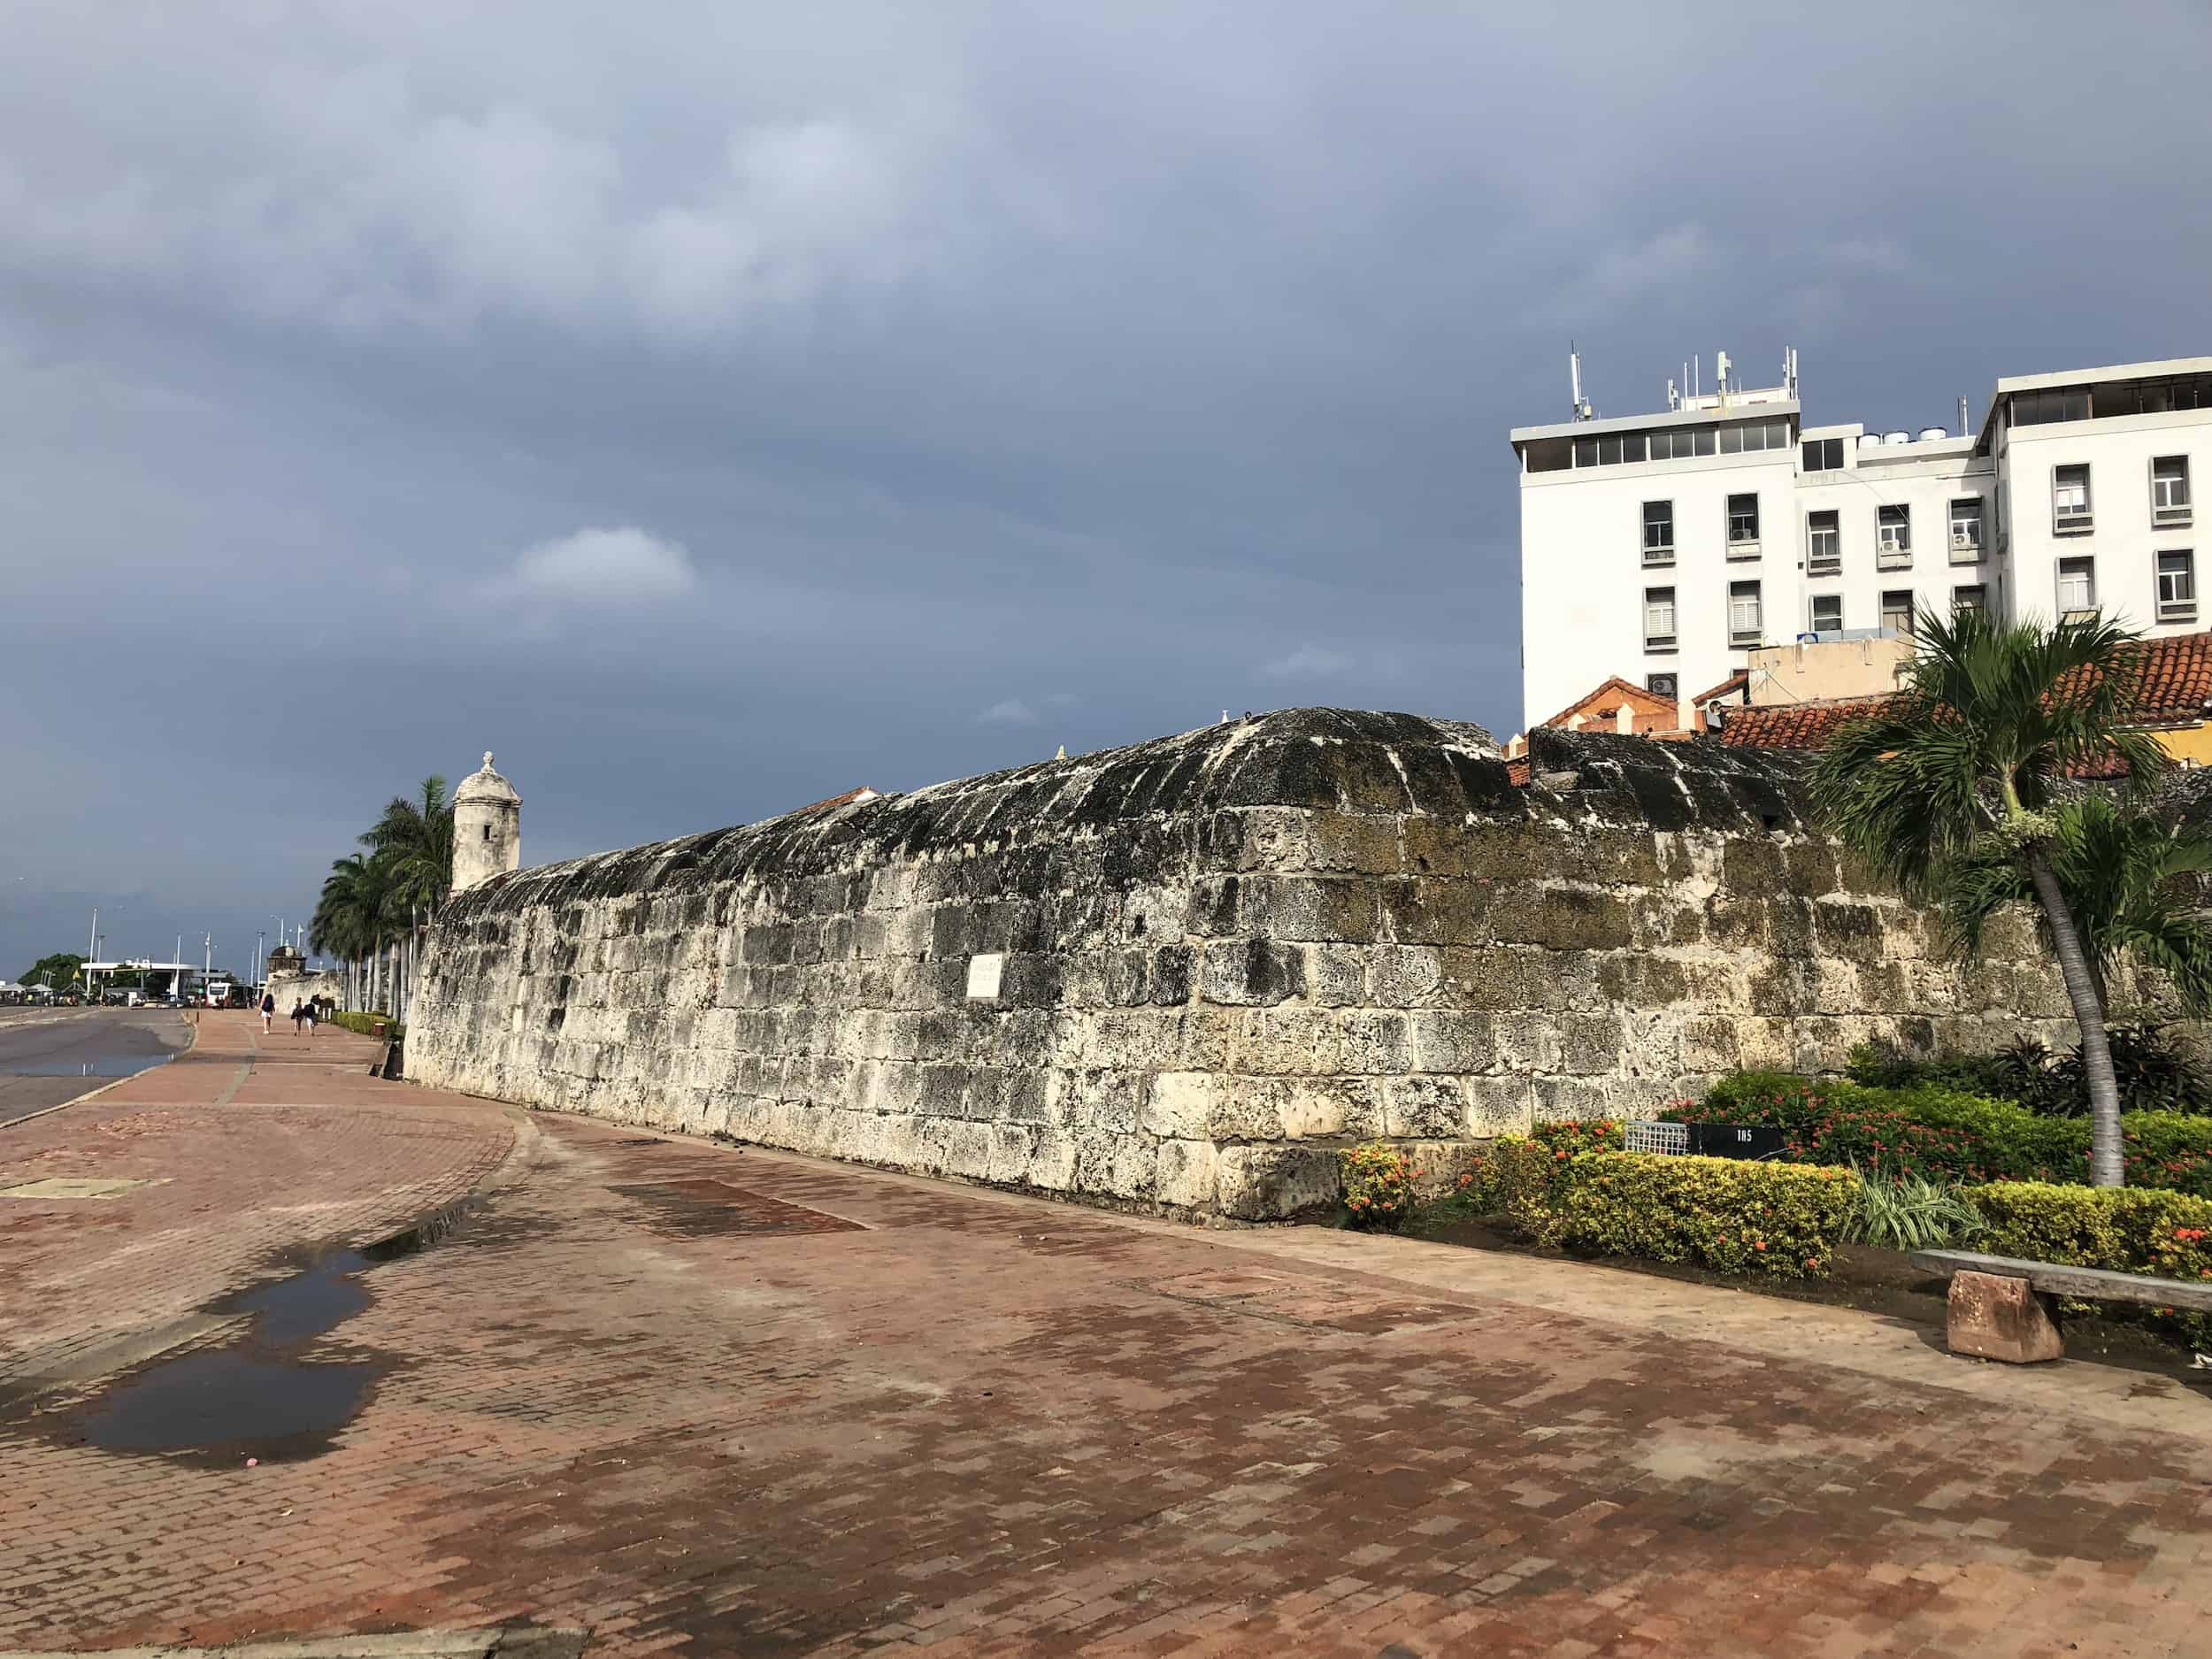 Bastion of Saint John the Evangelist on the Walls of Cartagena, Colombia